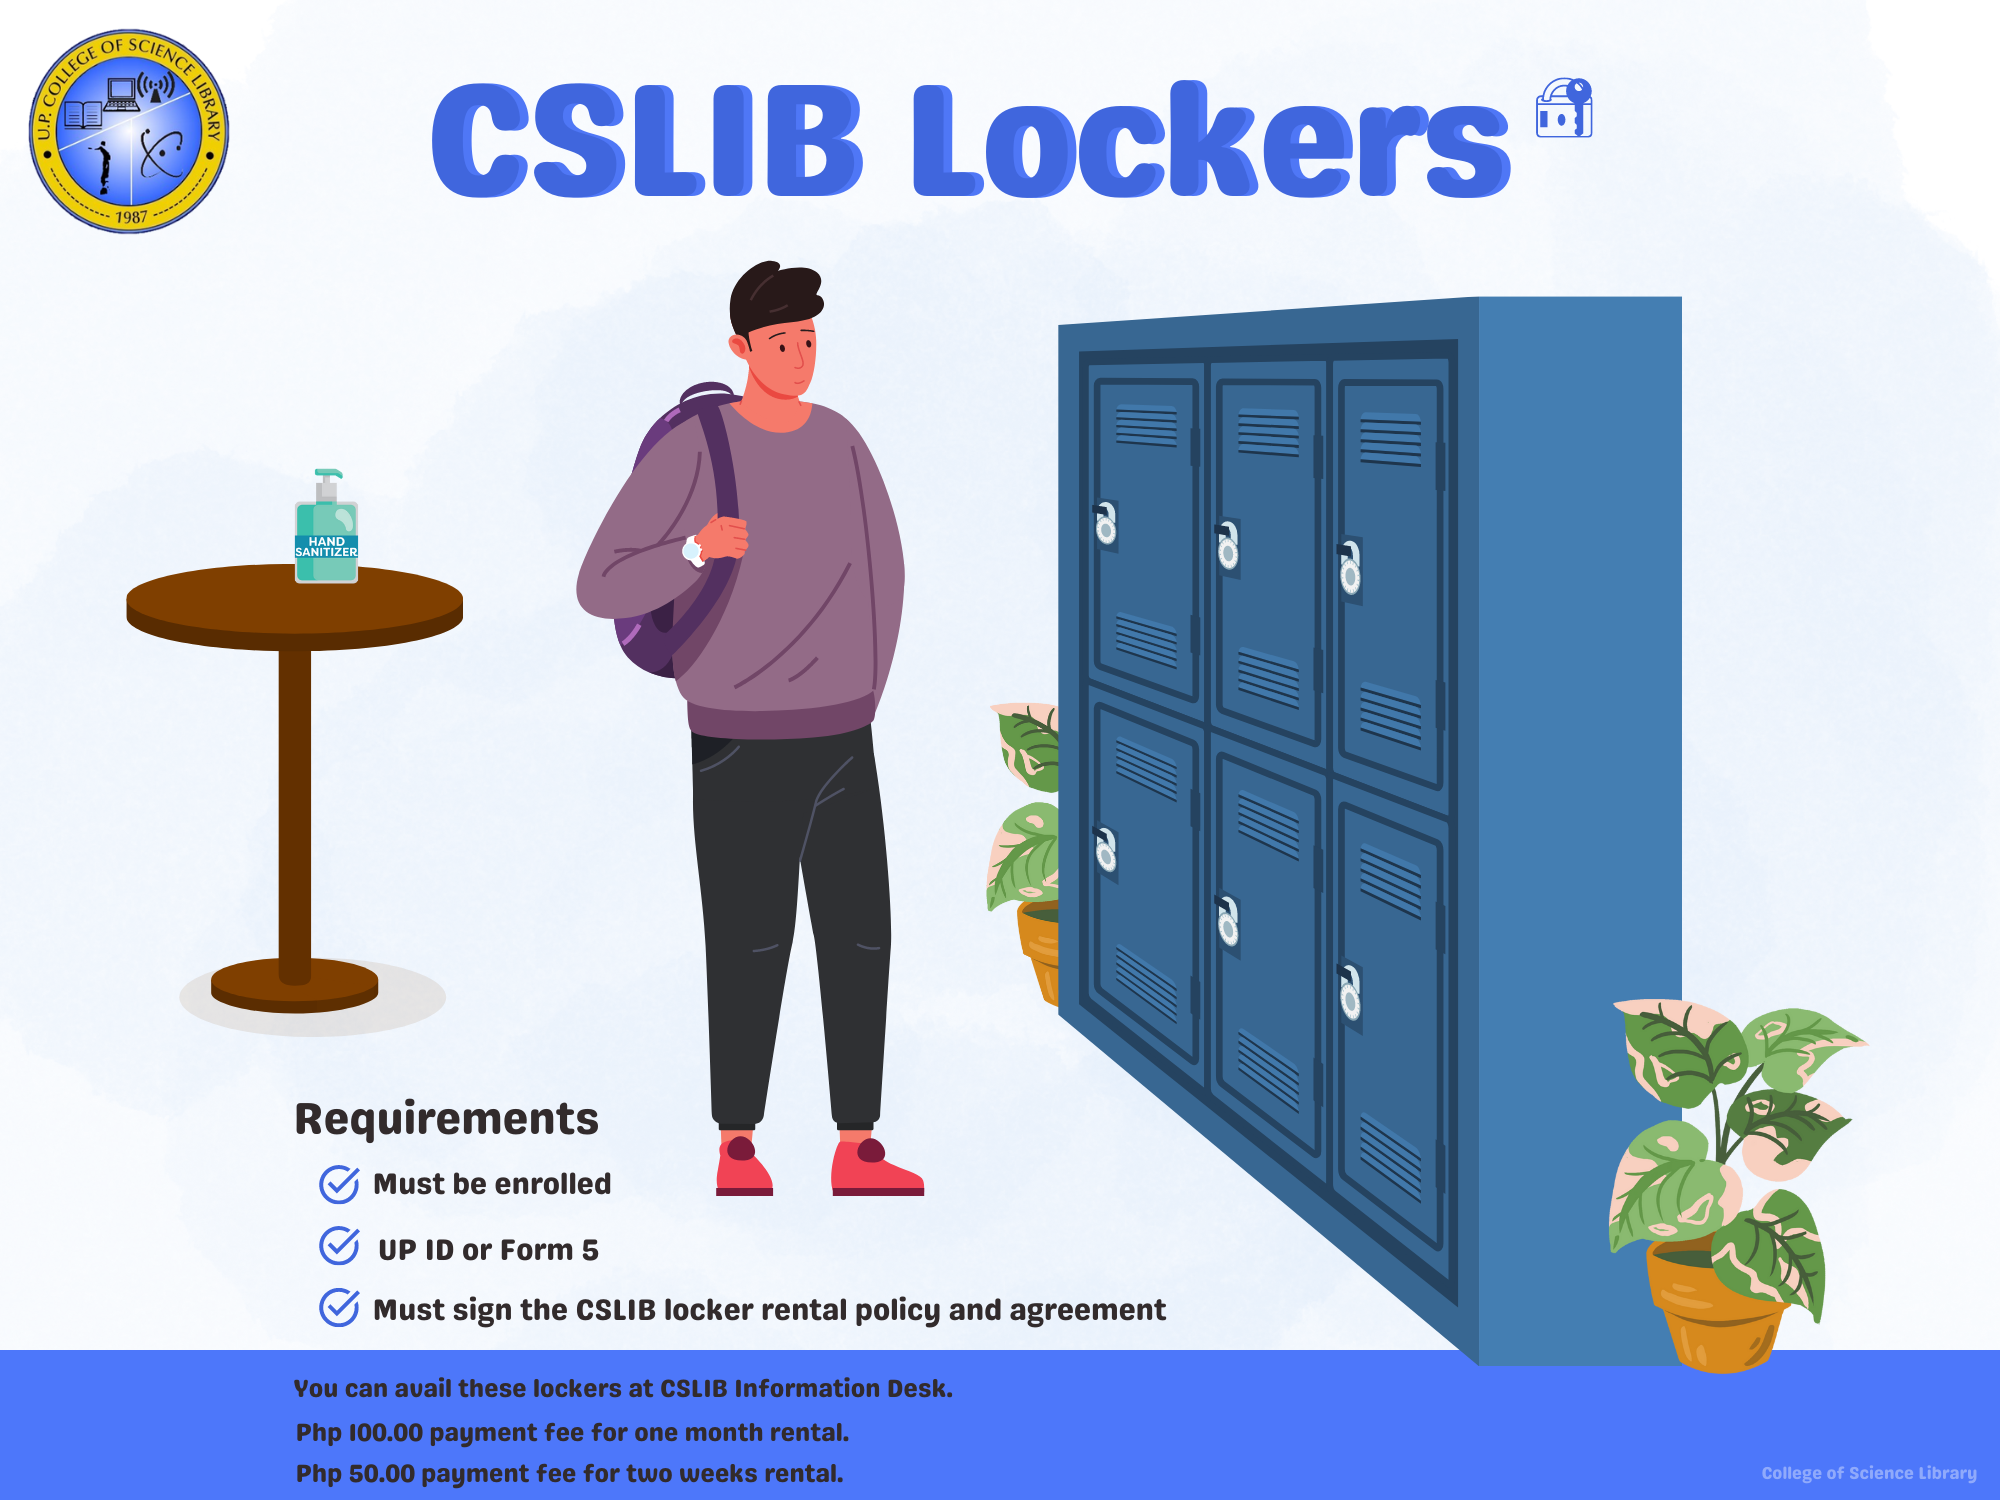 Lockers are now available!